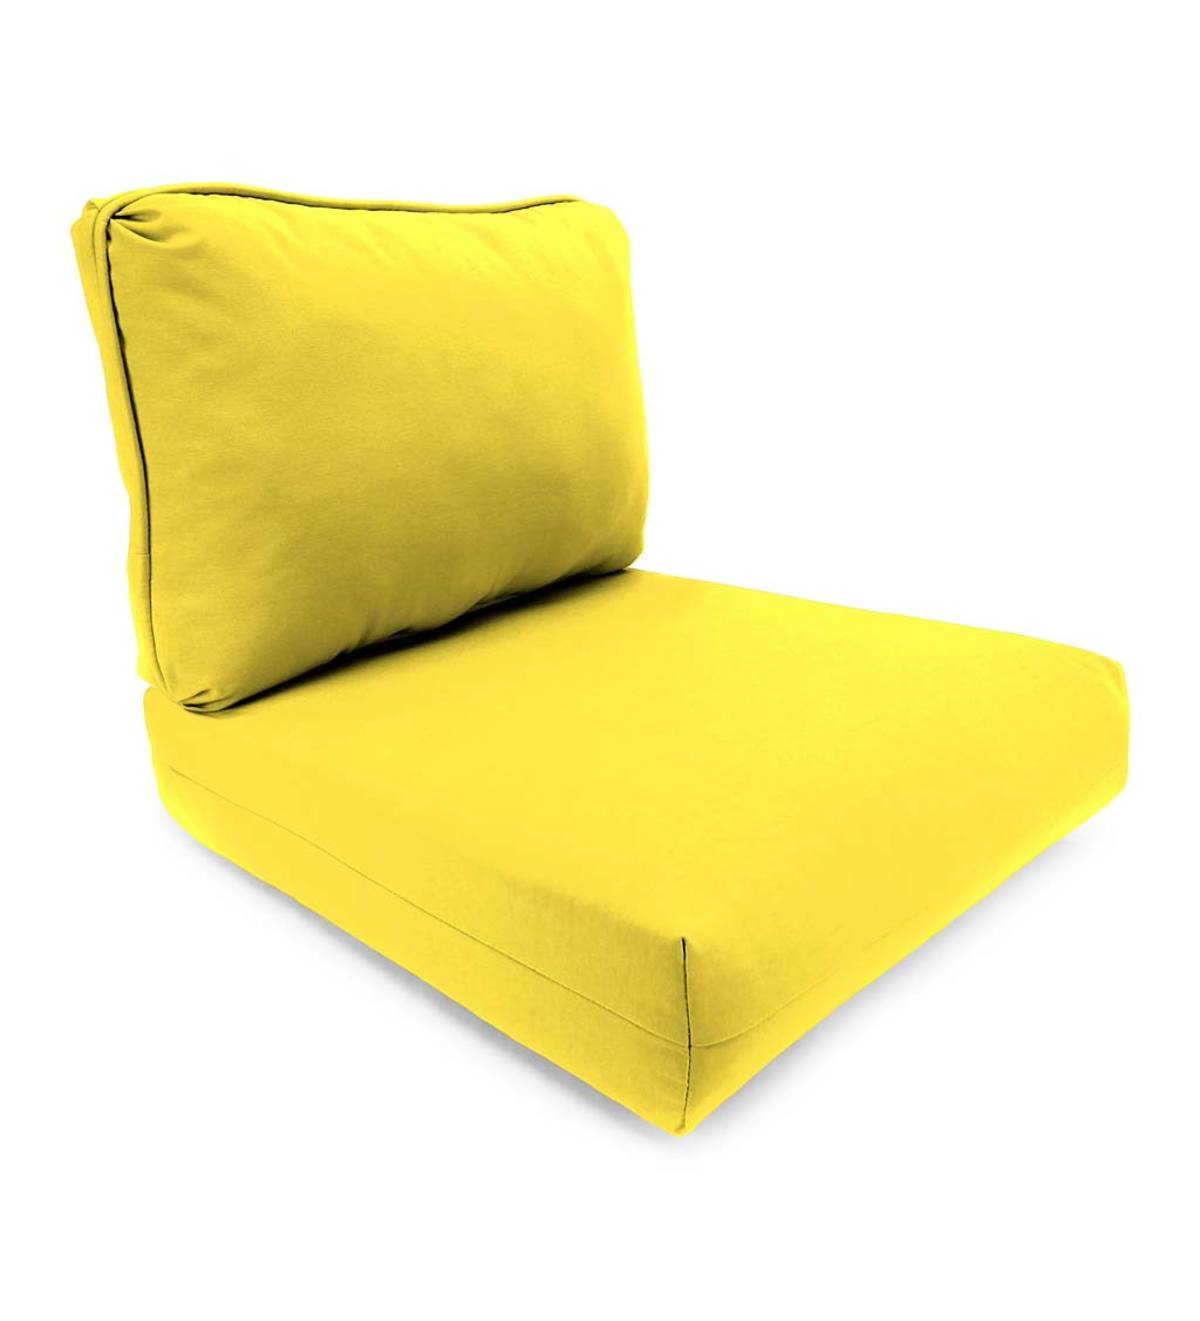 Seat and Back Replacement Cushions for Claremont, Prospect Hill and Urbanna Furniture